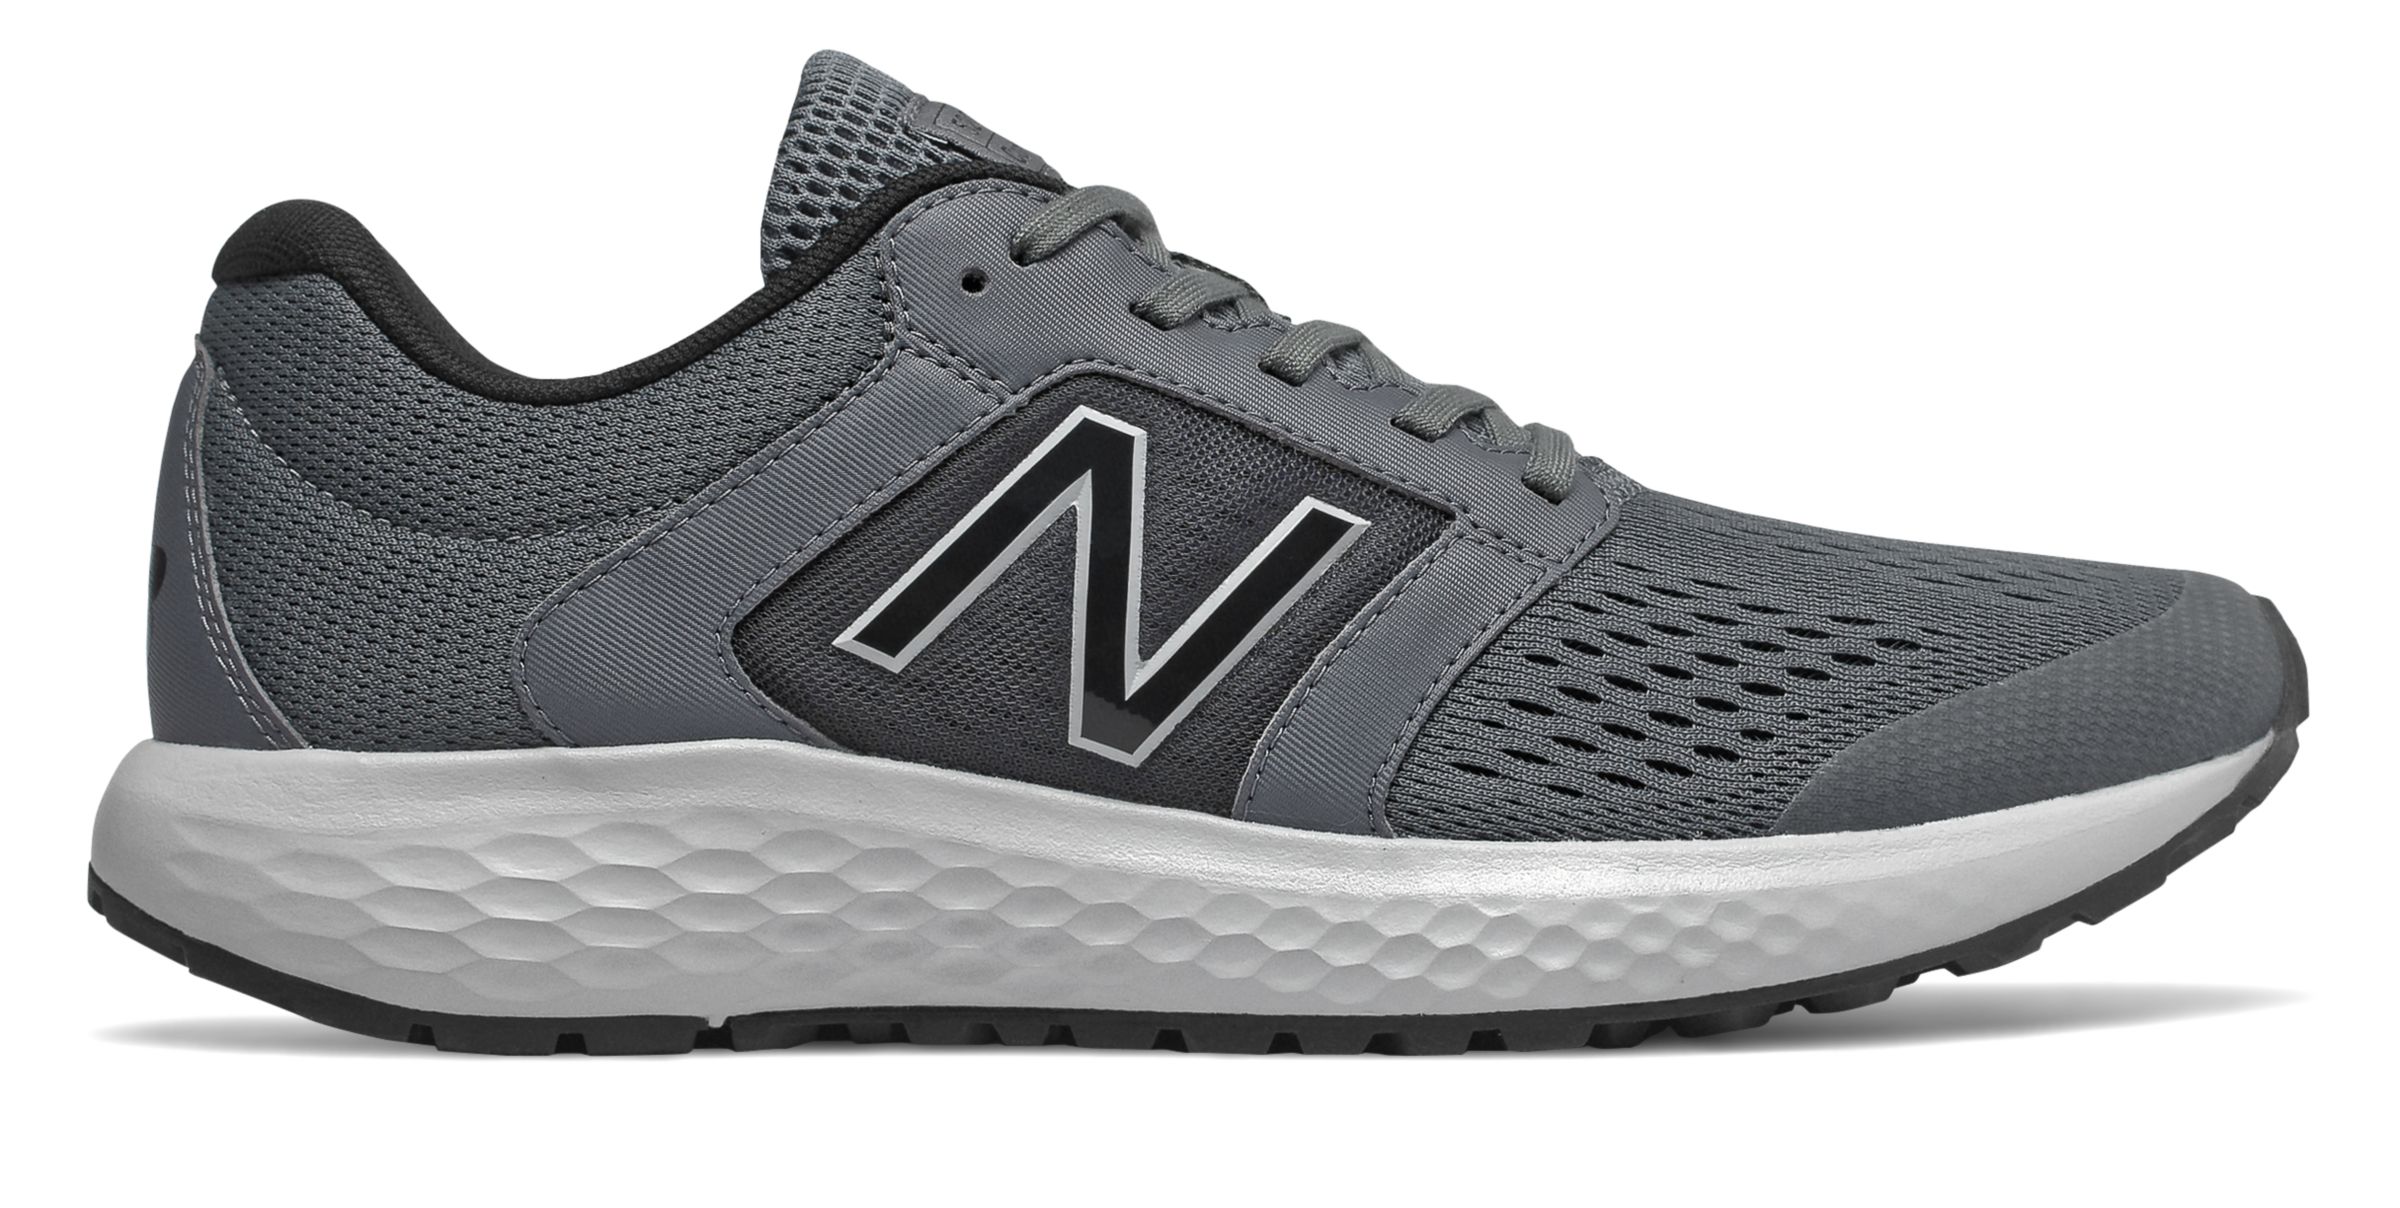 New Balance M520-V5 on Sale - Discounts Up to 38% Off on M520LS5 at Joe's New  Balance Outlet